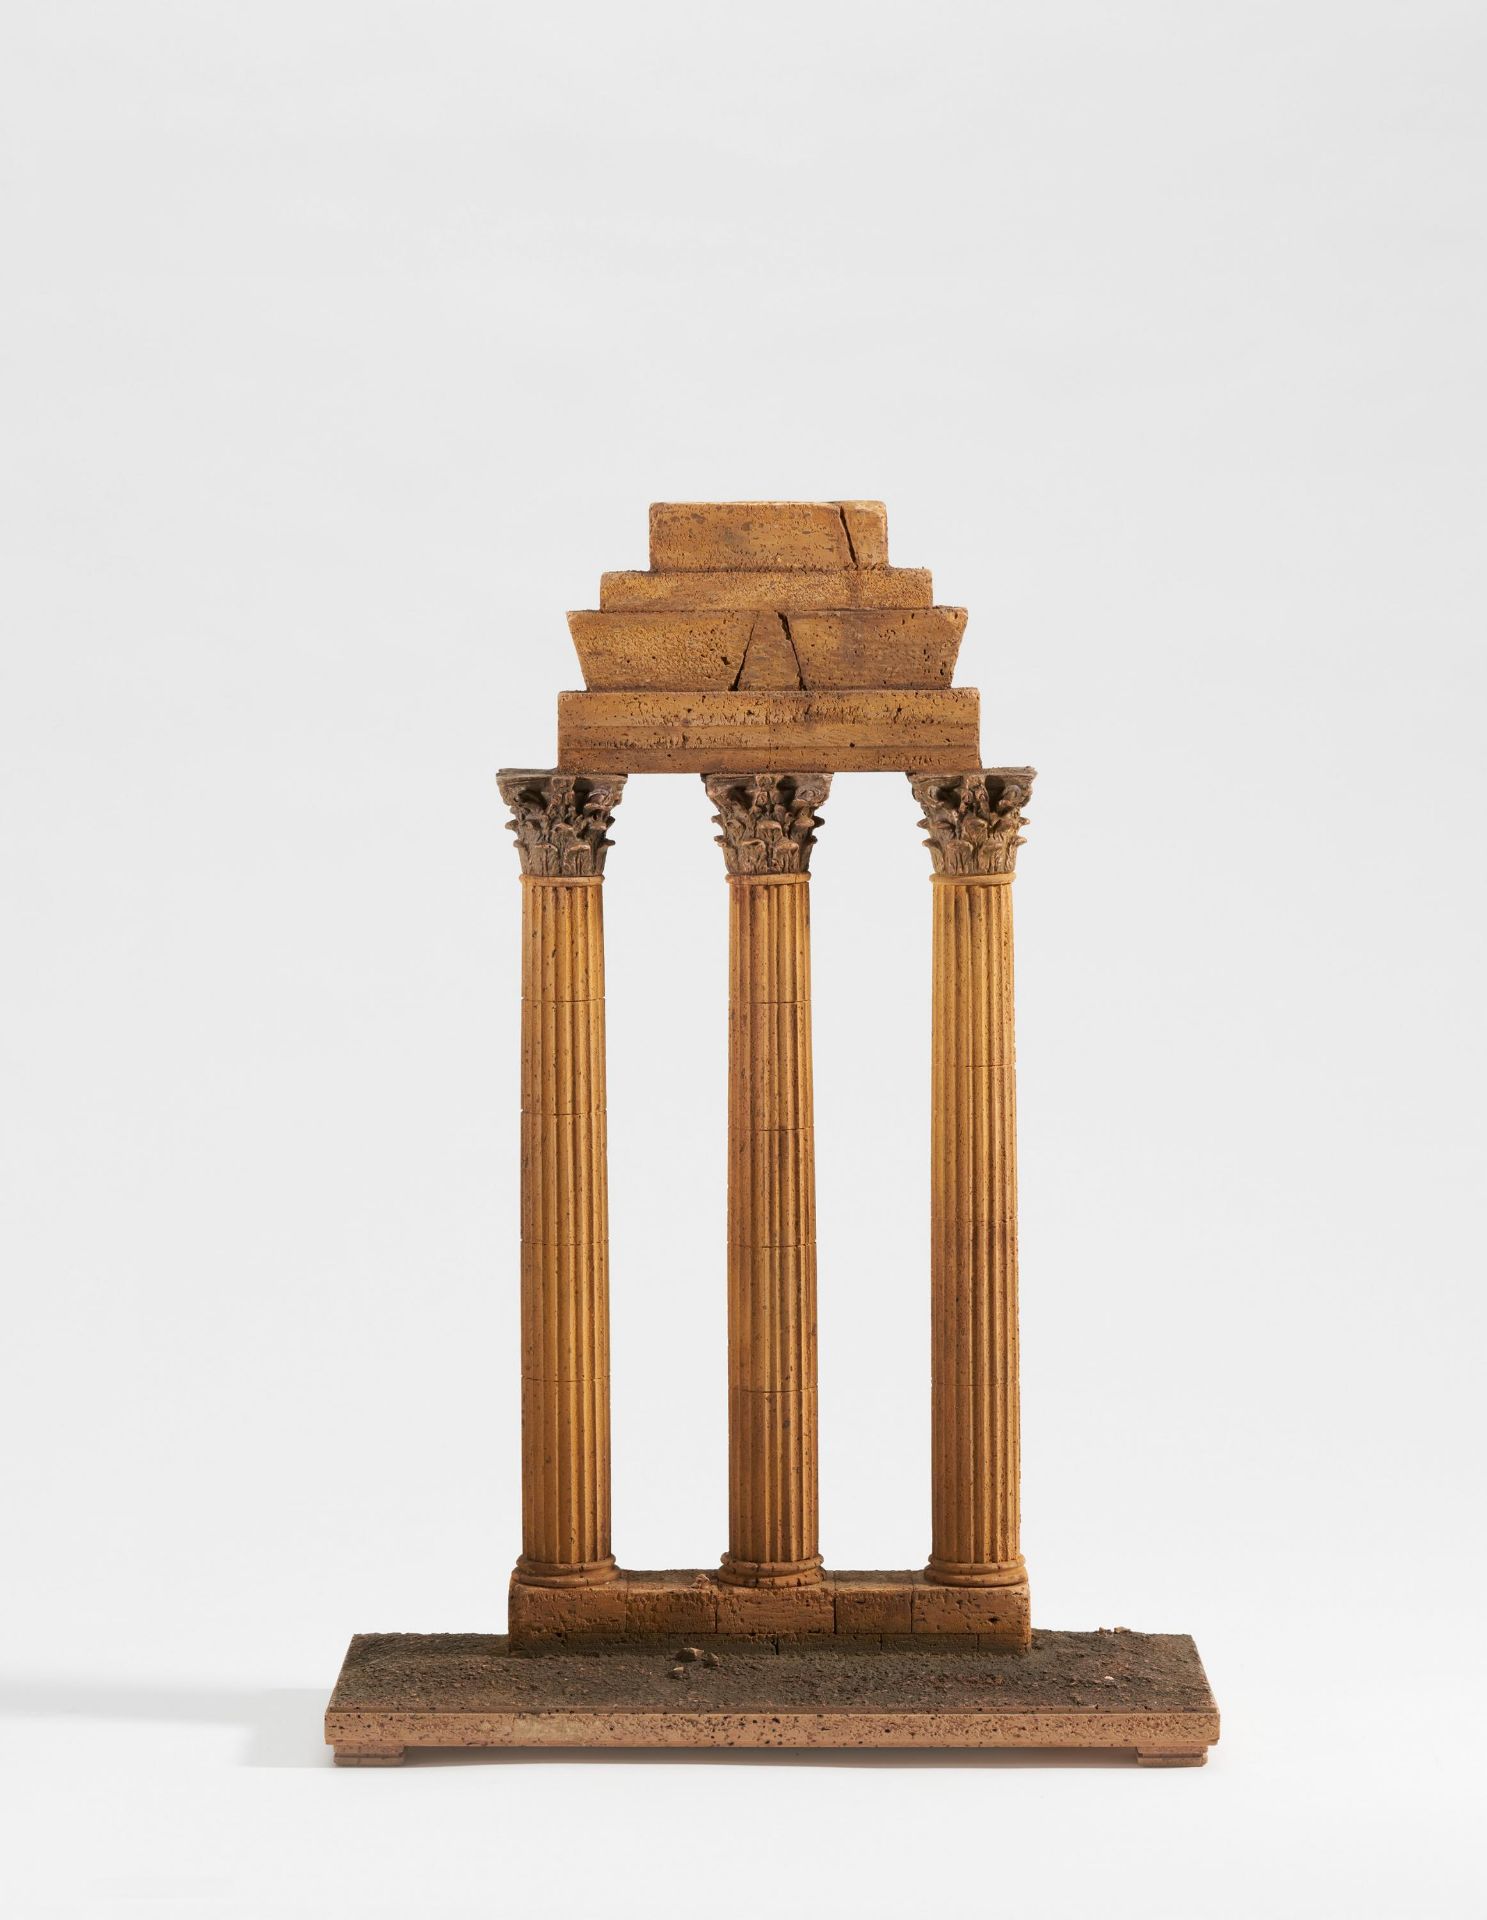 Cork model of the Temple of Castor and Pollux in Rome - Image 3 of 4